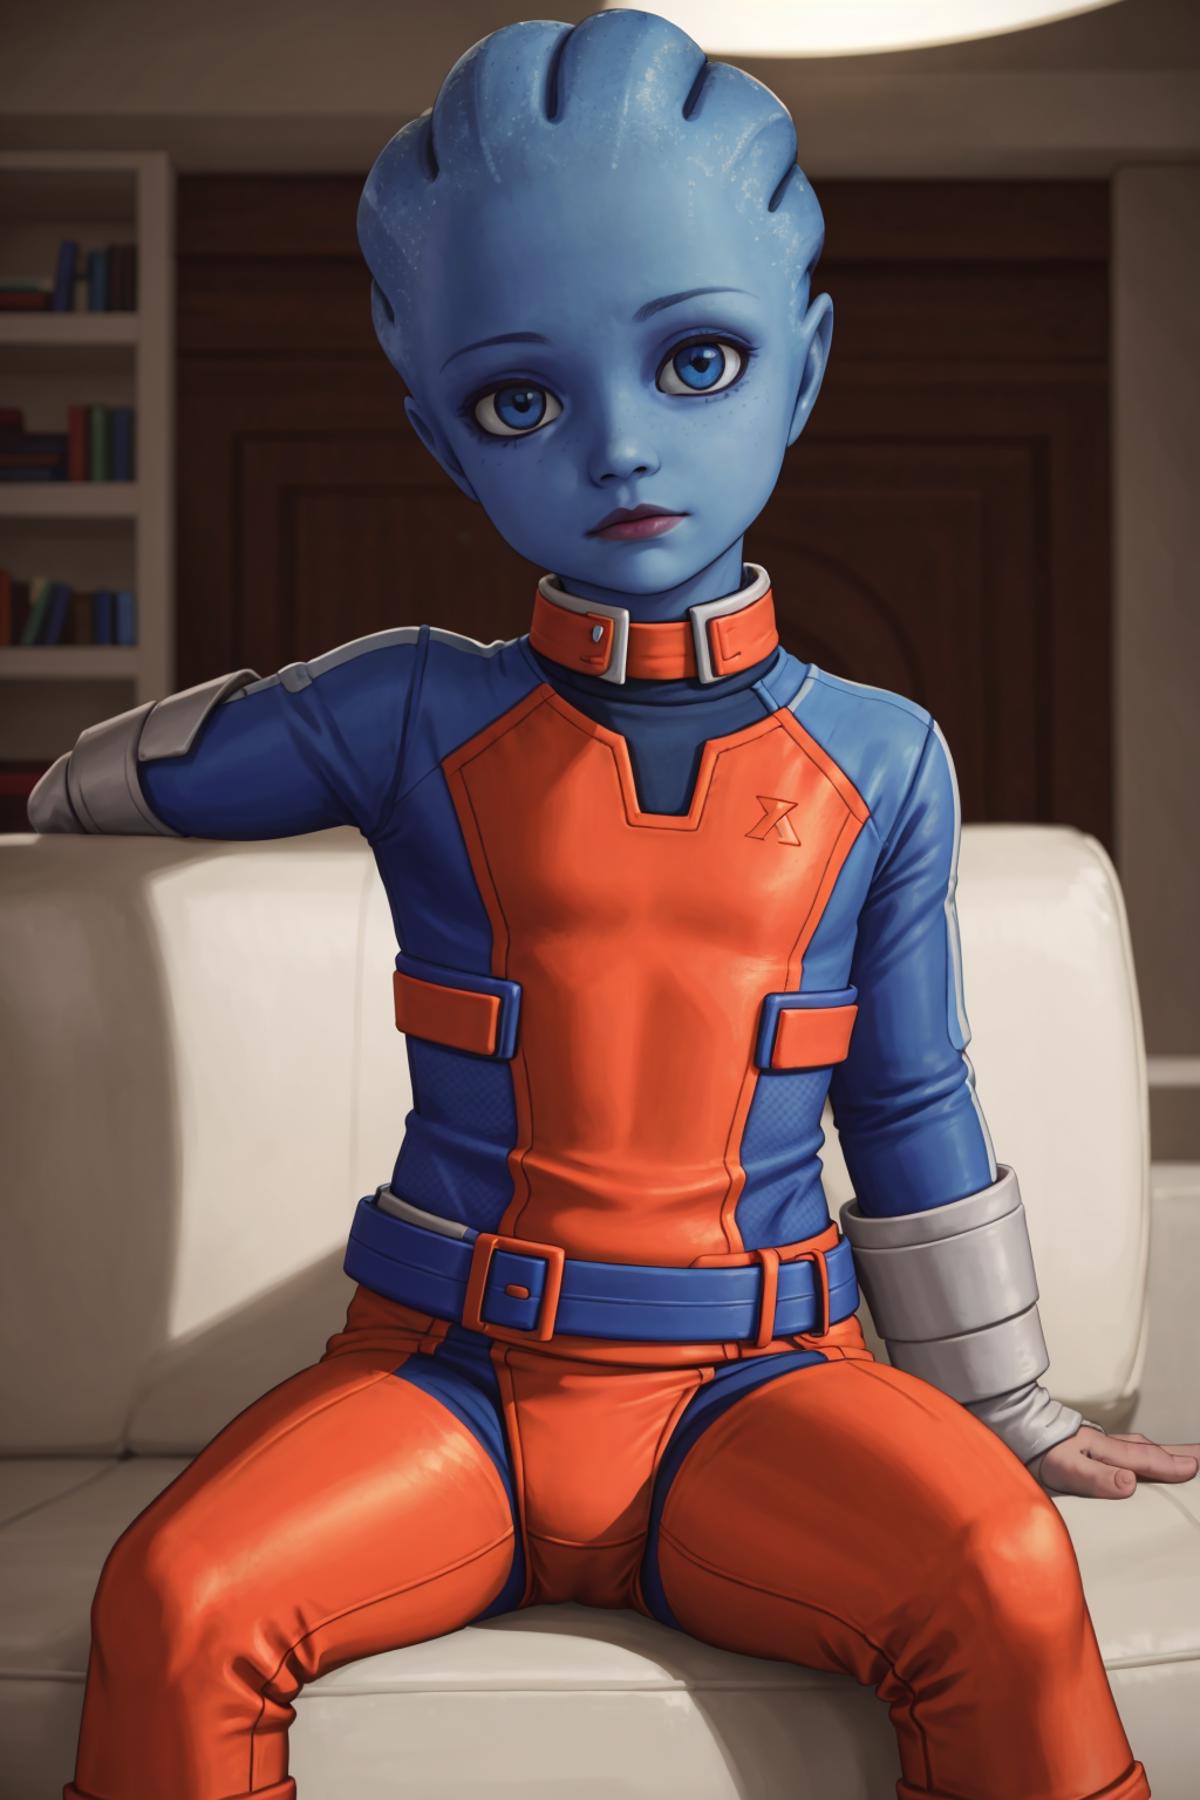 A blue and orange cartoon character sitting on a white couch.